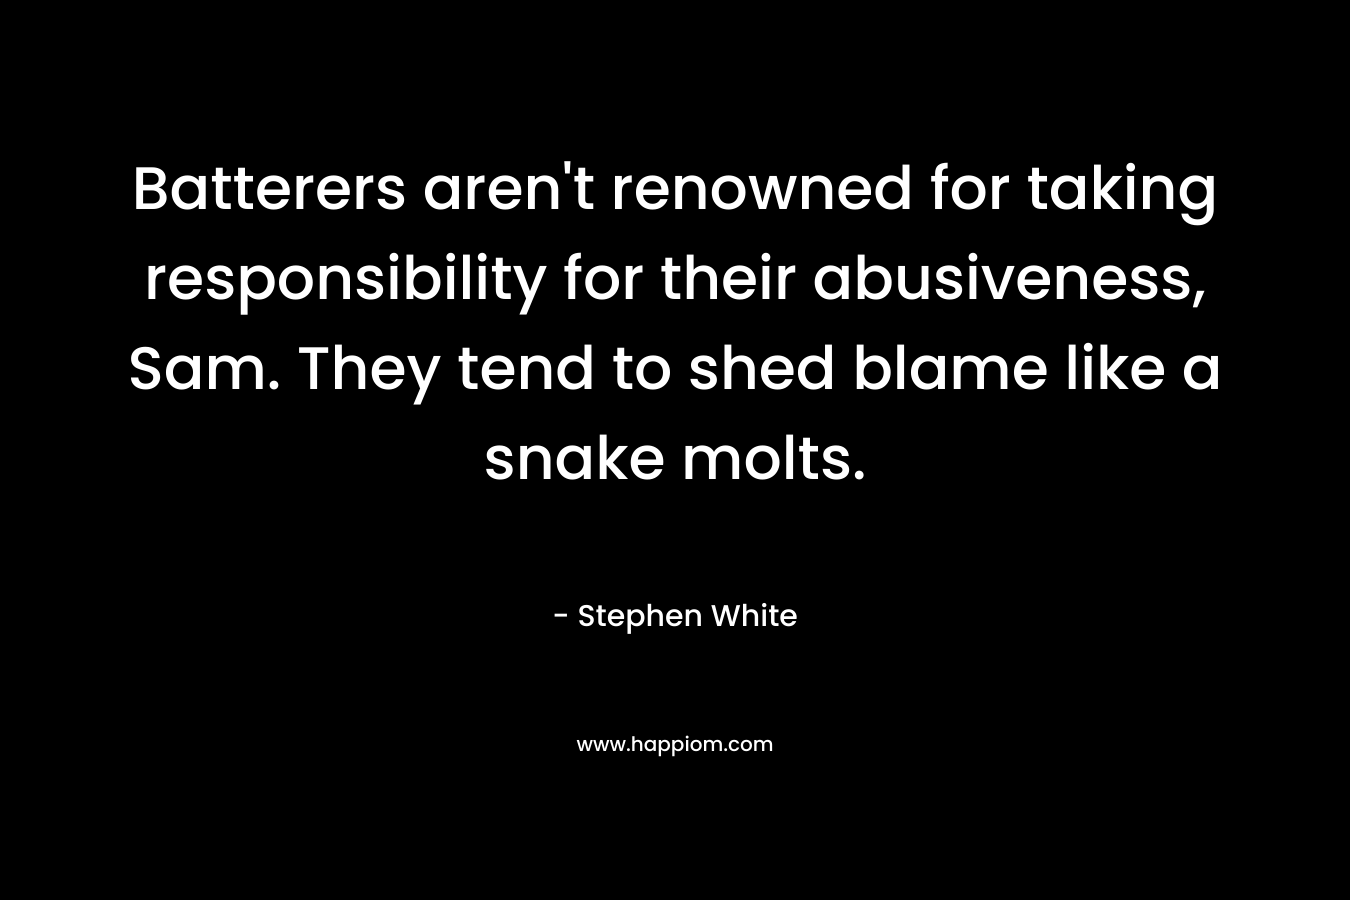 Batterers aren’t renowned for taking responsibility for their abusiveness, Sam. They tend to shed blame like a snake molts. – Stephen White